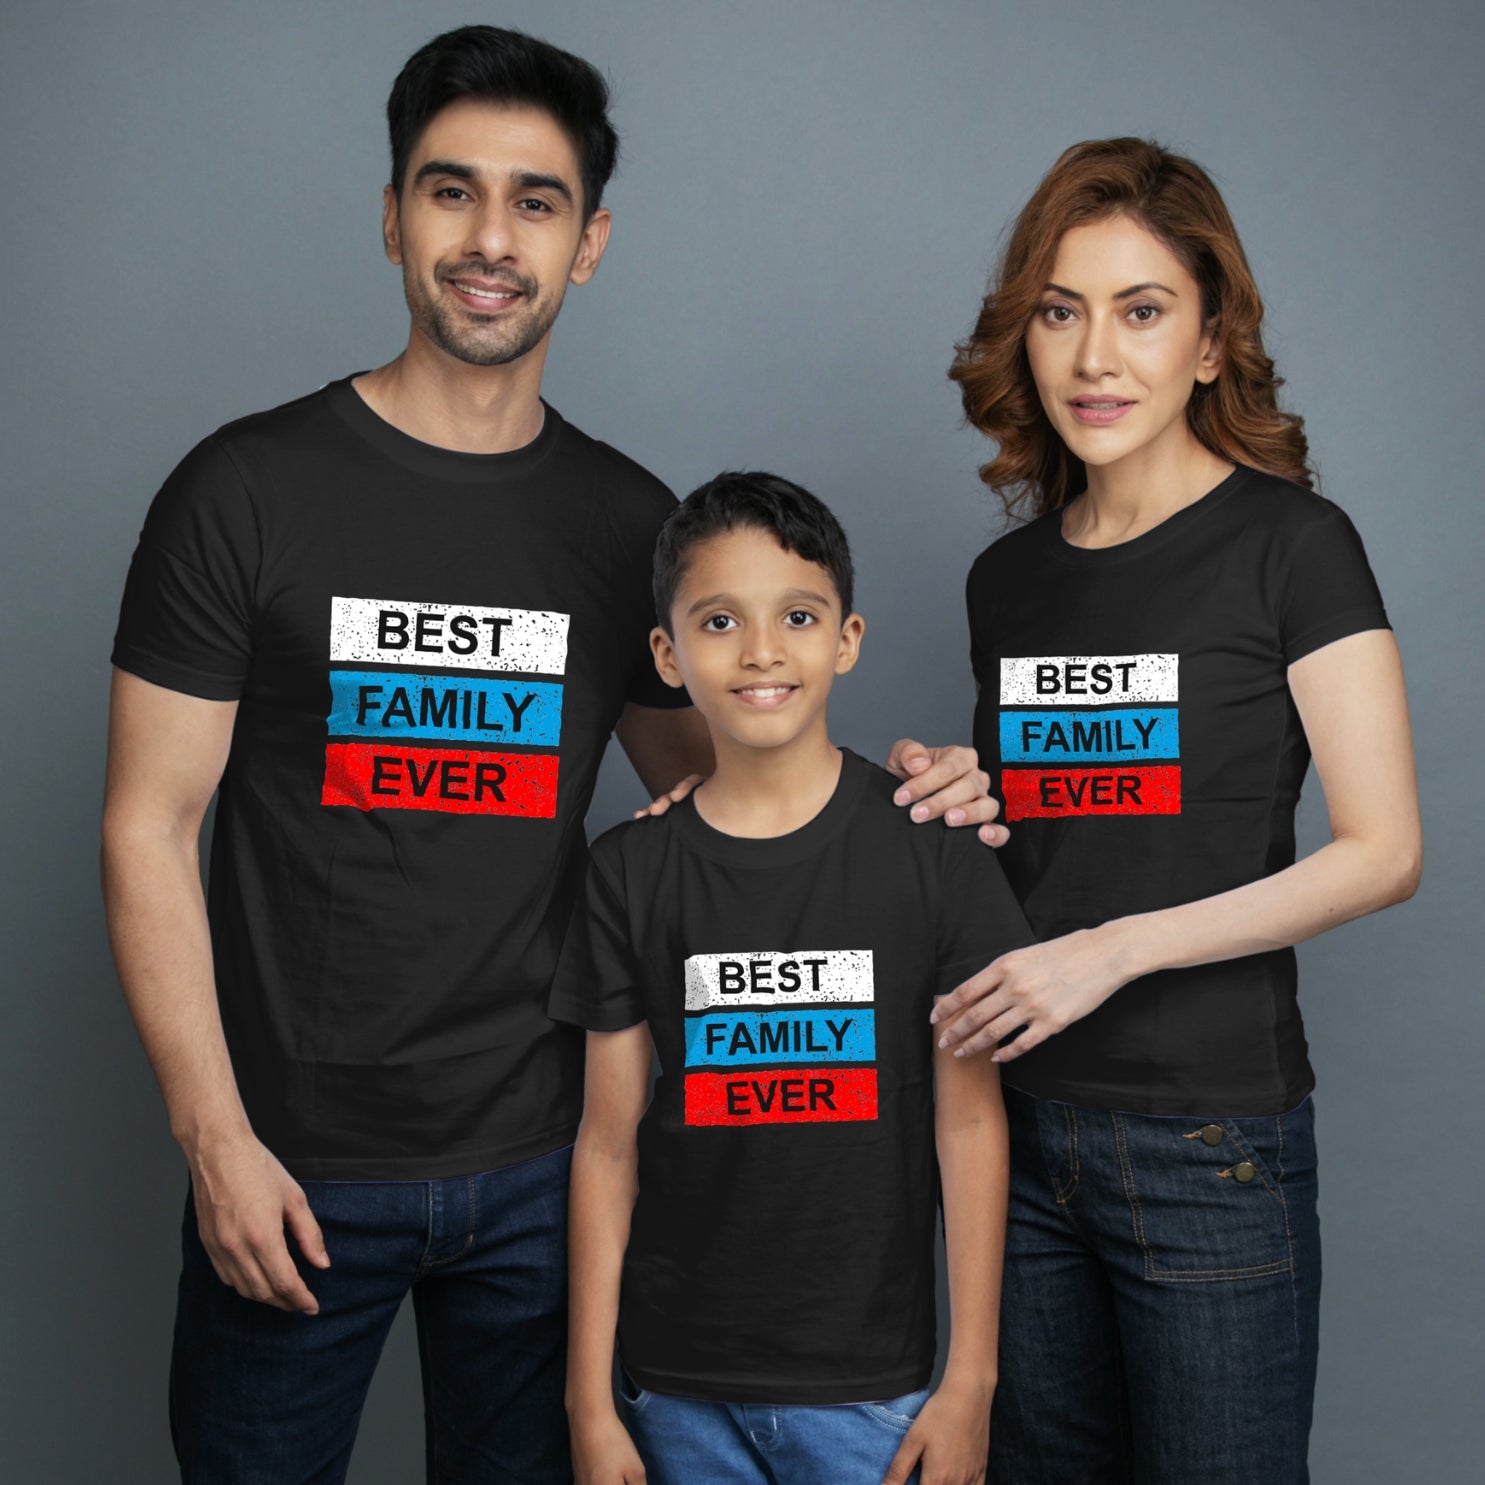 Family t shirt set of 3 Mom Dad Son in Black Colour - Best Family Ever Variant